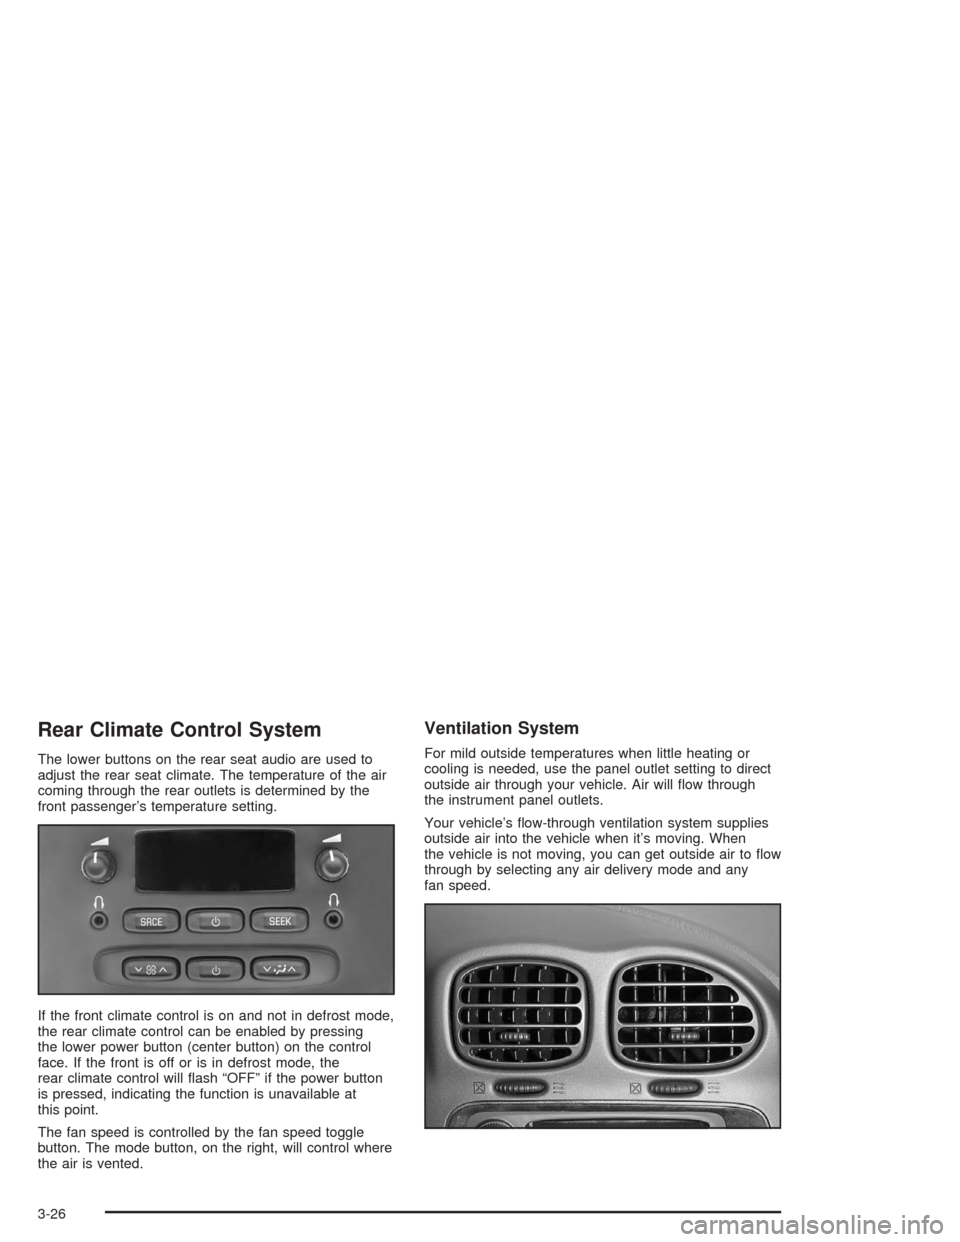 Oldsmobile Bravada 2004  Owners Manuals Rear Climate Control System
The lower buttons on the rear seat audio are used to
adjust the rear seat climate. The temperature of the air
coming through the rear outlets is determined by the
front pas